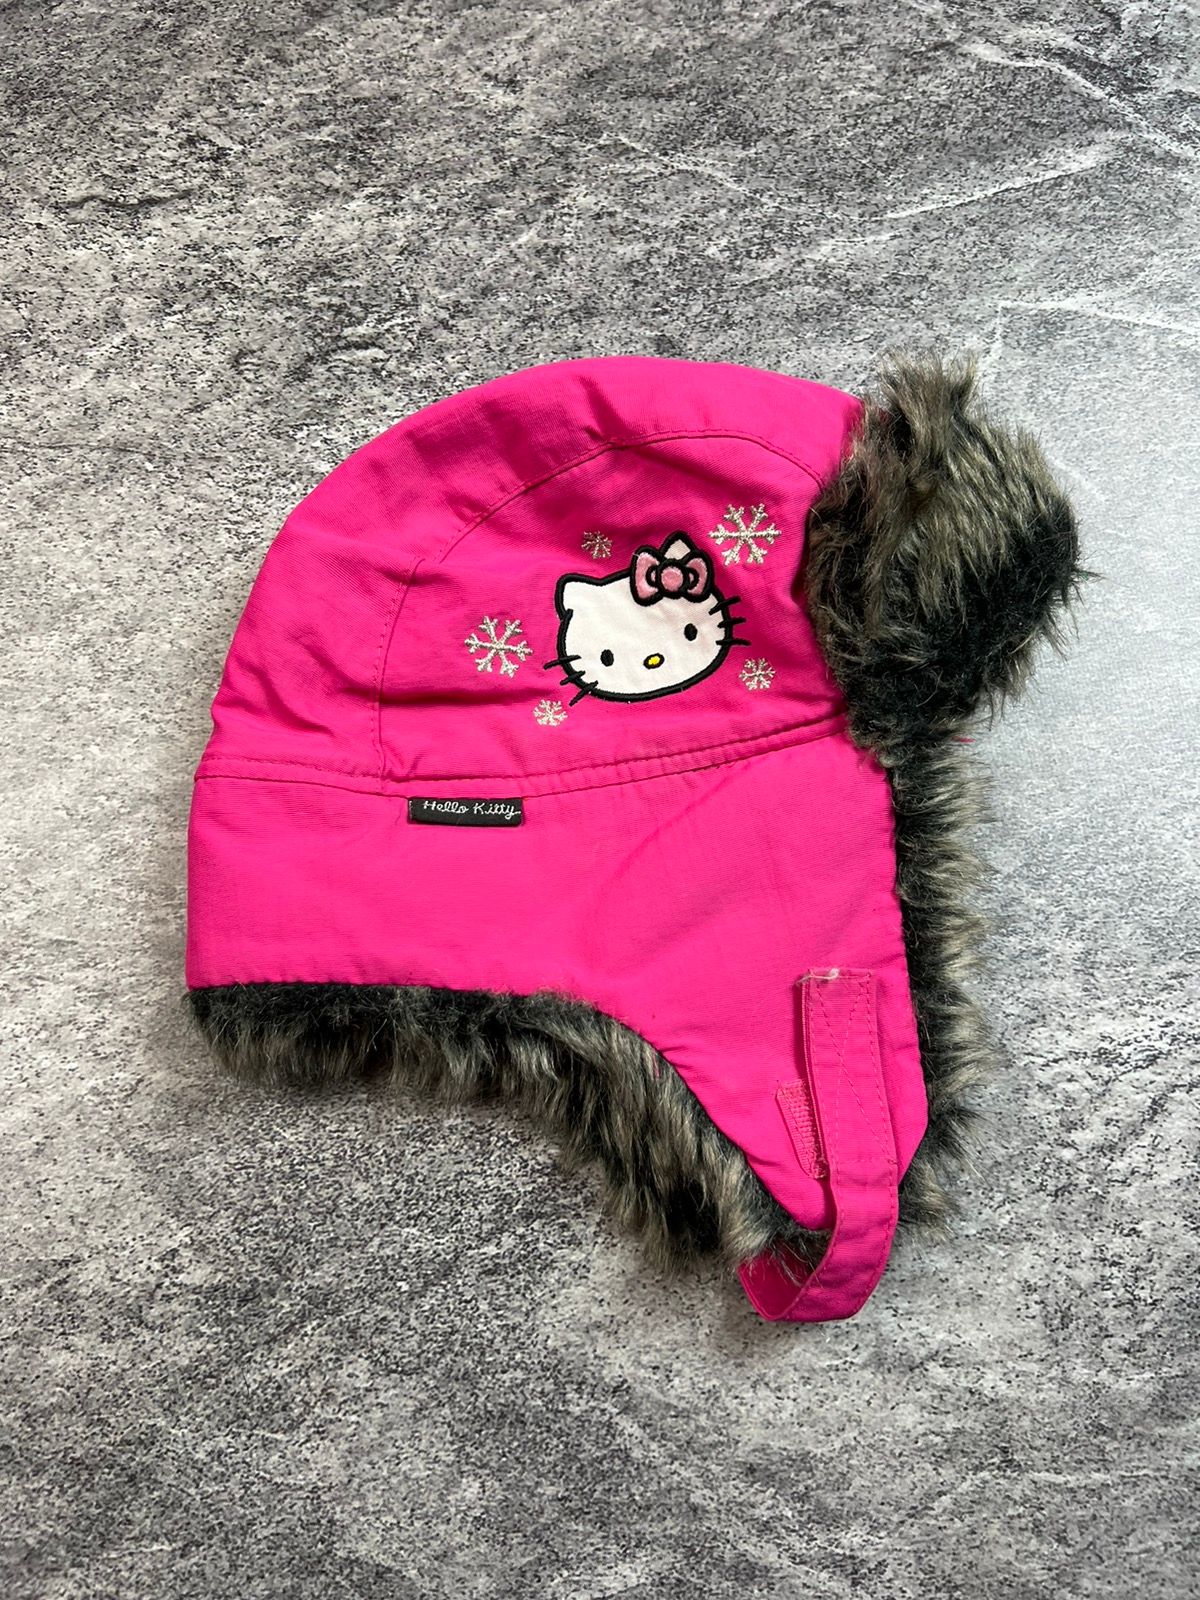 Pre-owned Vintage Y2k Hello Kitty Sanrio Japan Style Cute Fuzzy Trapper Hat In Pink